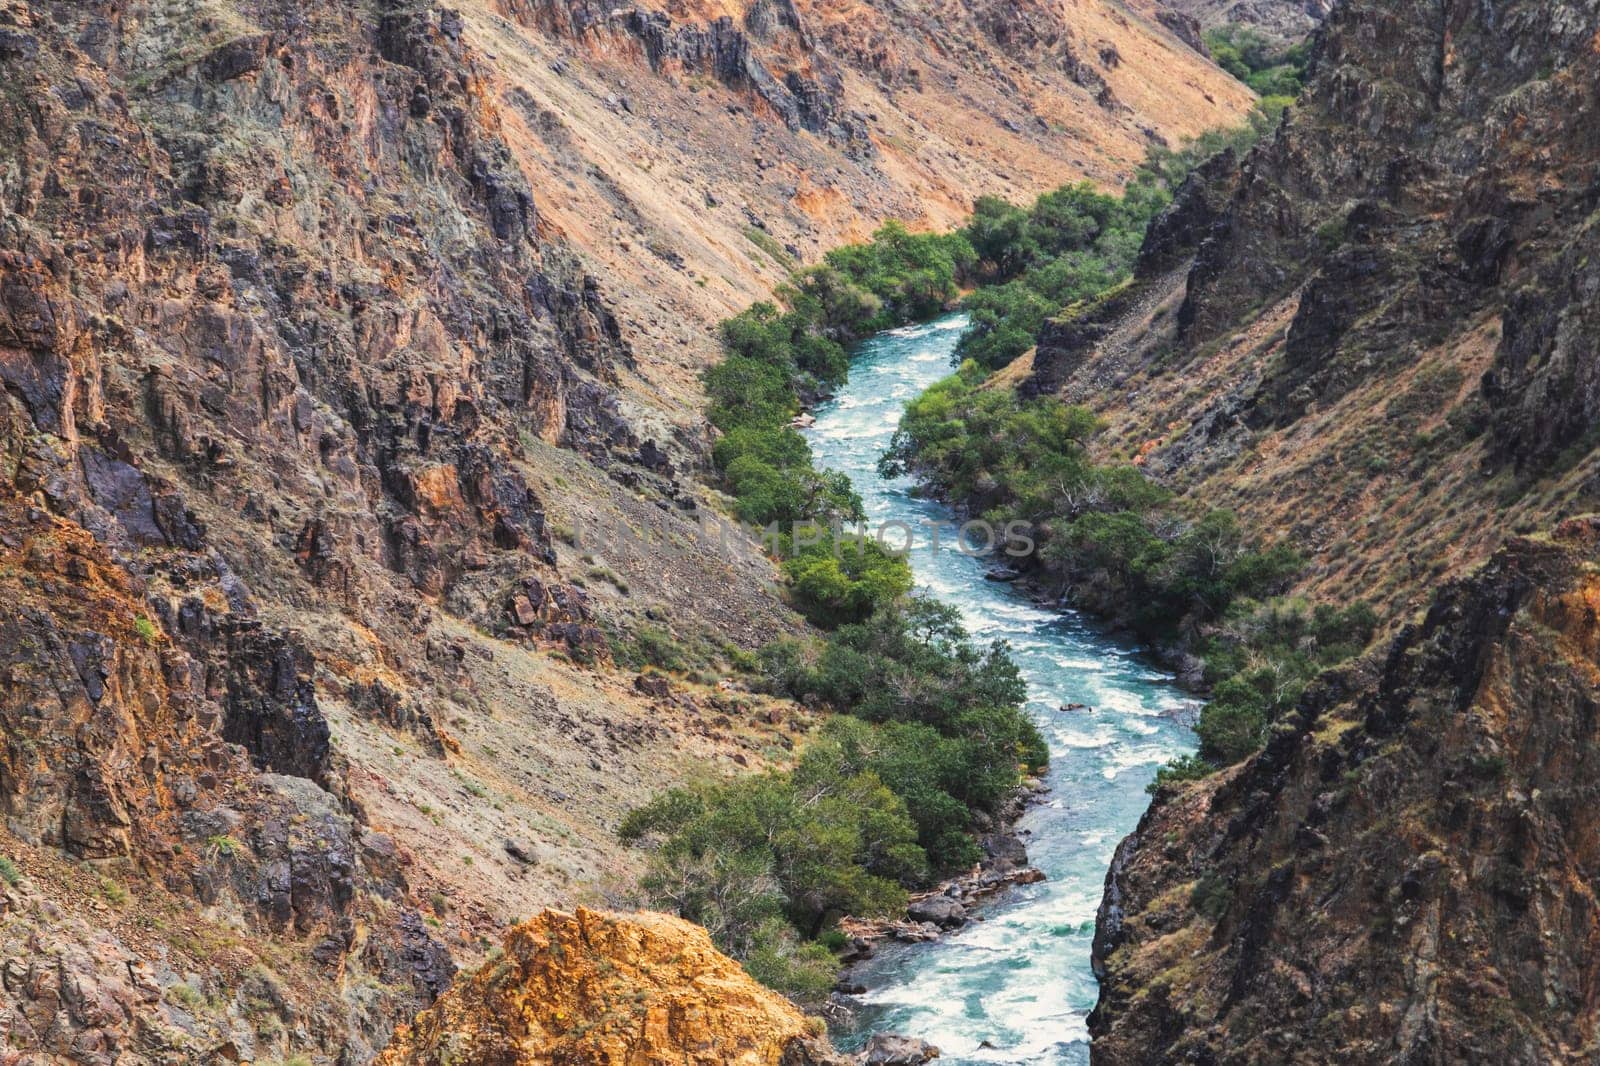 The Charyn River, in the gorge that flows through the Charyn Canyon in Kazakhstan in the Almaty region.